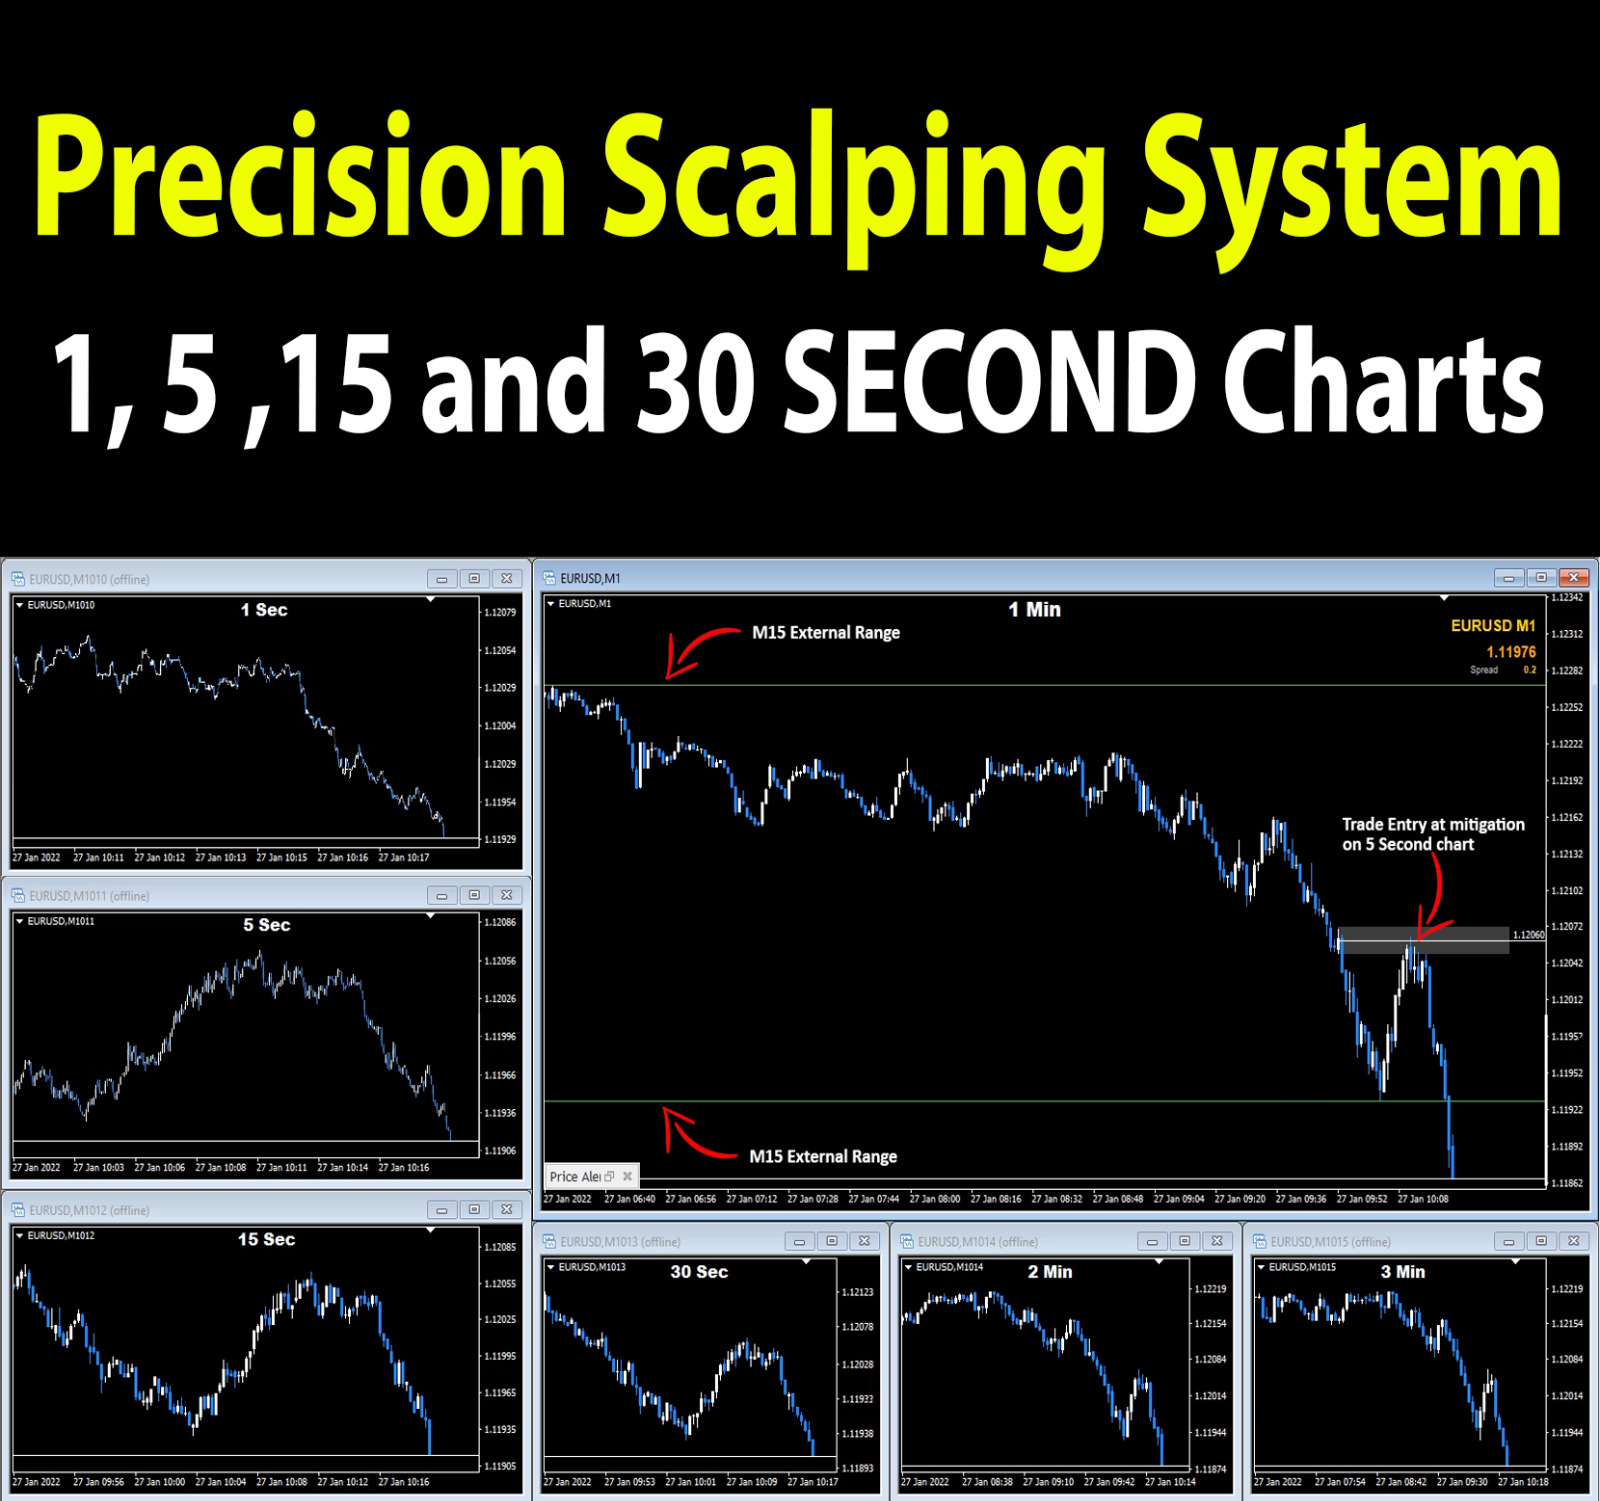 The Ultimate Smart Money Trading System. Highly profitable Scalping Strategy